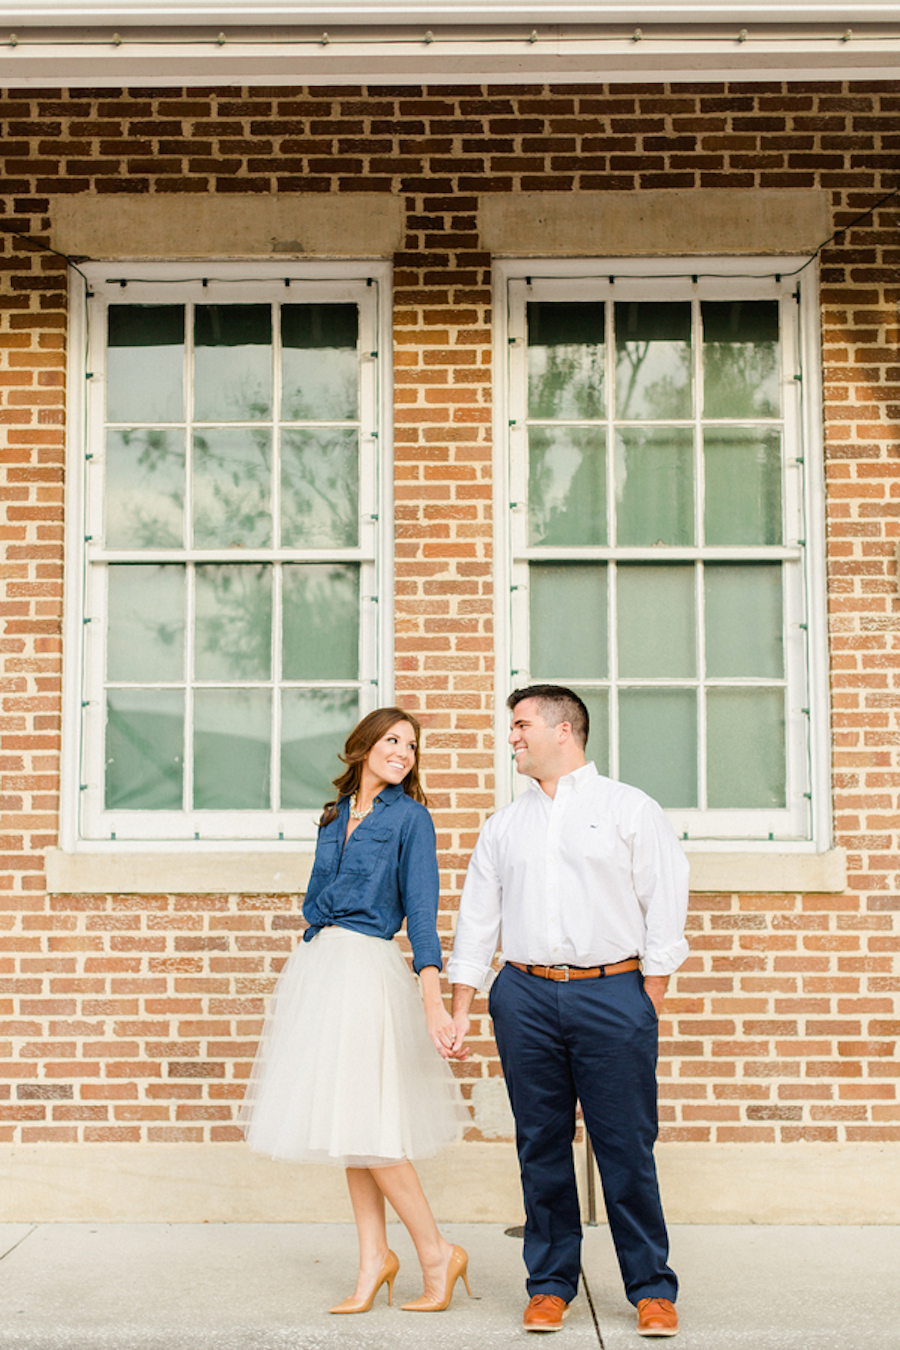 St. Pete Outdoor Engagement Portrait with Brick Wall and Tulle Skirt with Denim Shirt | St. Petersburg Wedding Photographer Ailyn La Torre Photography